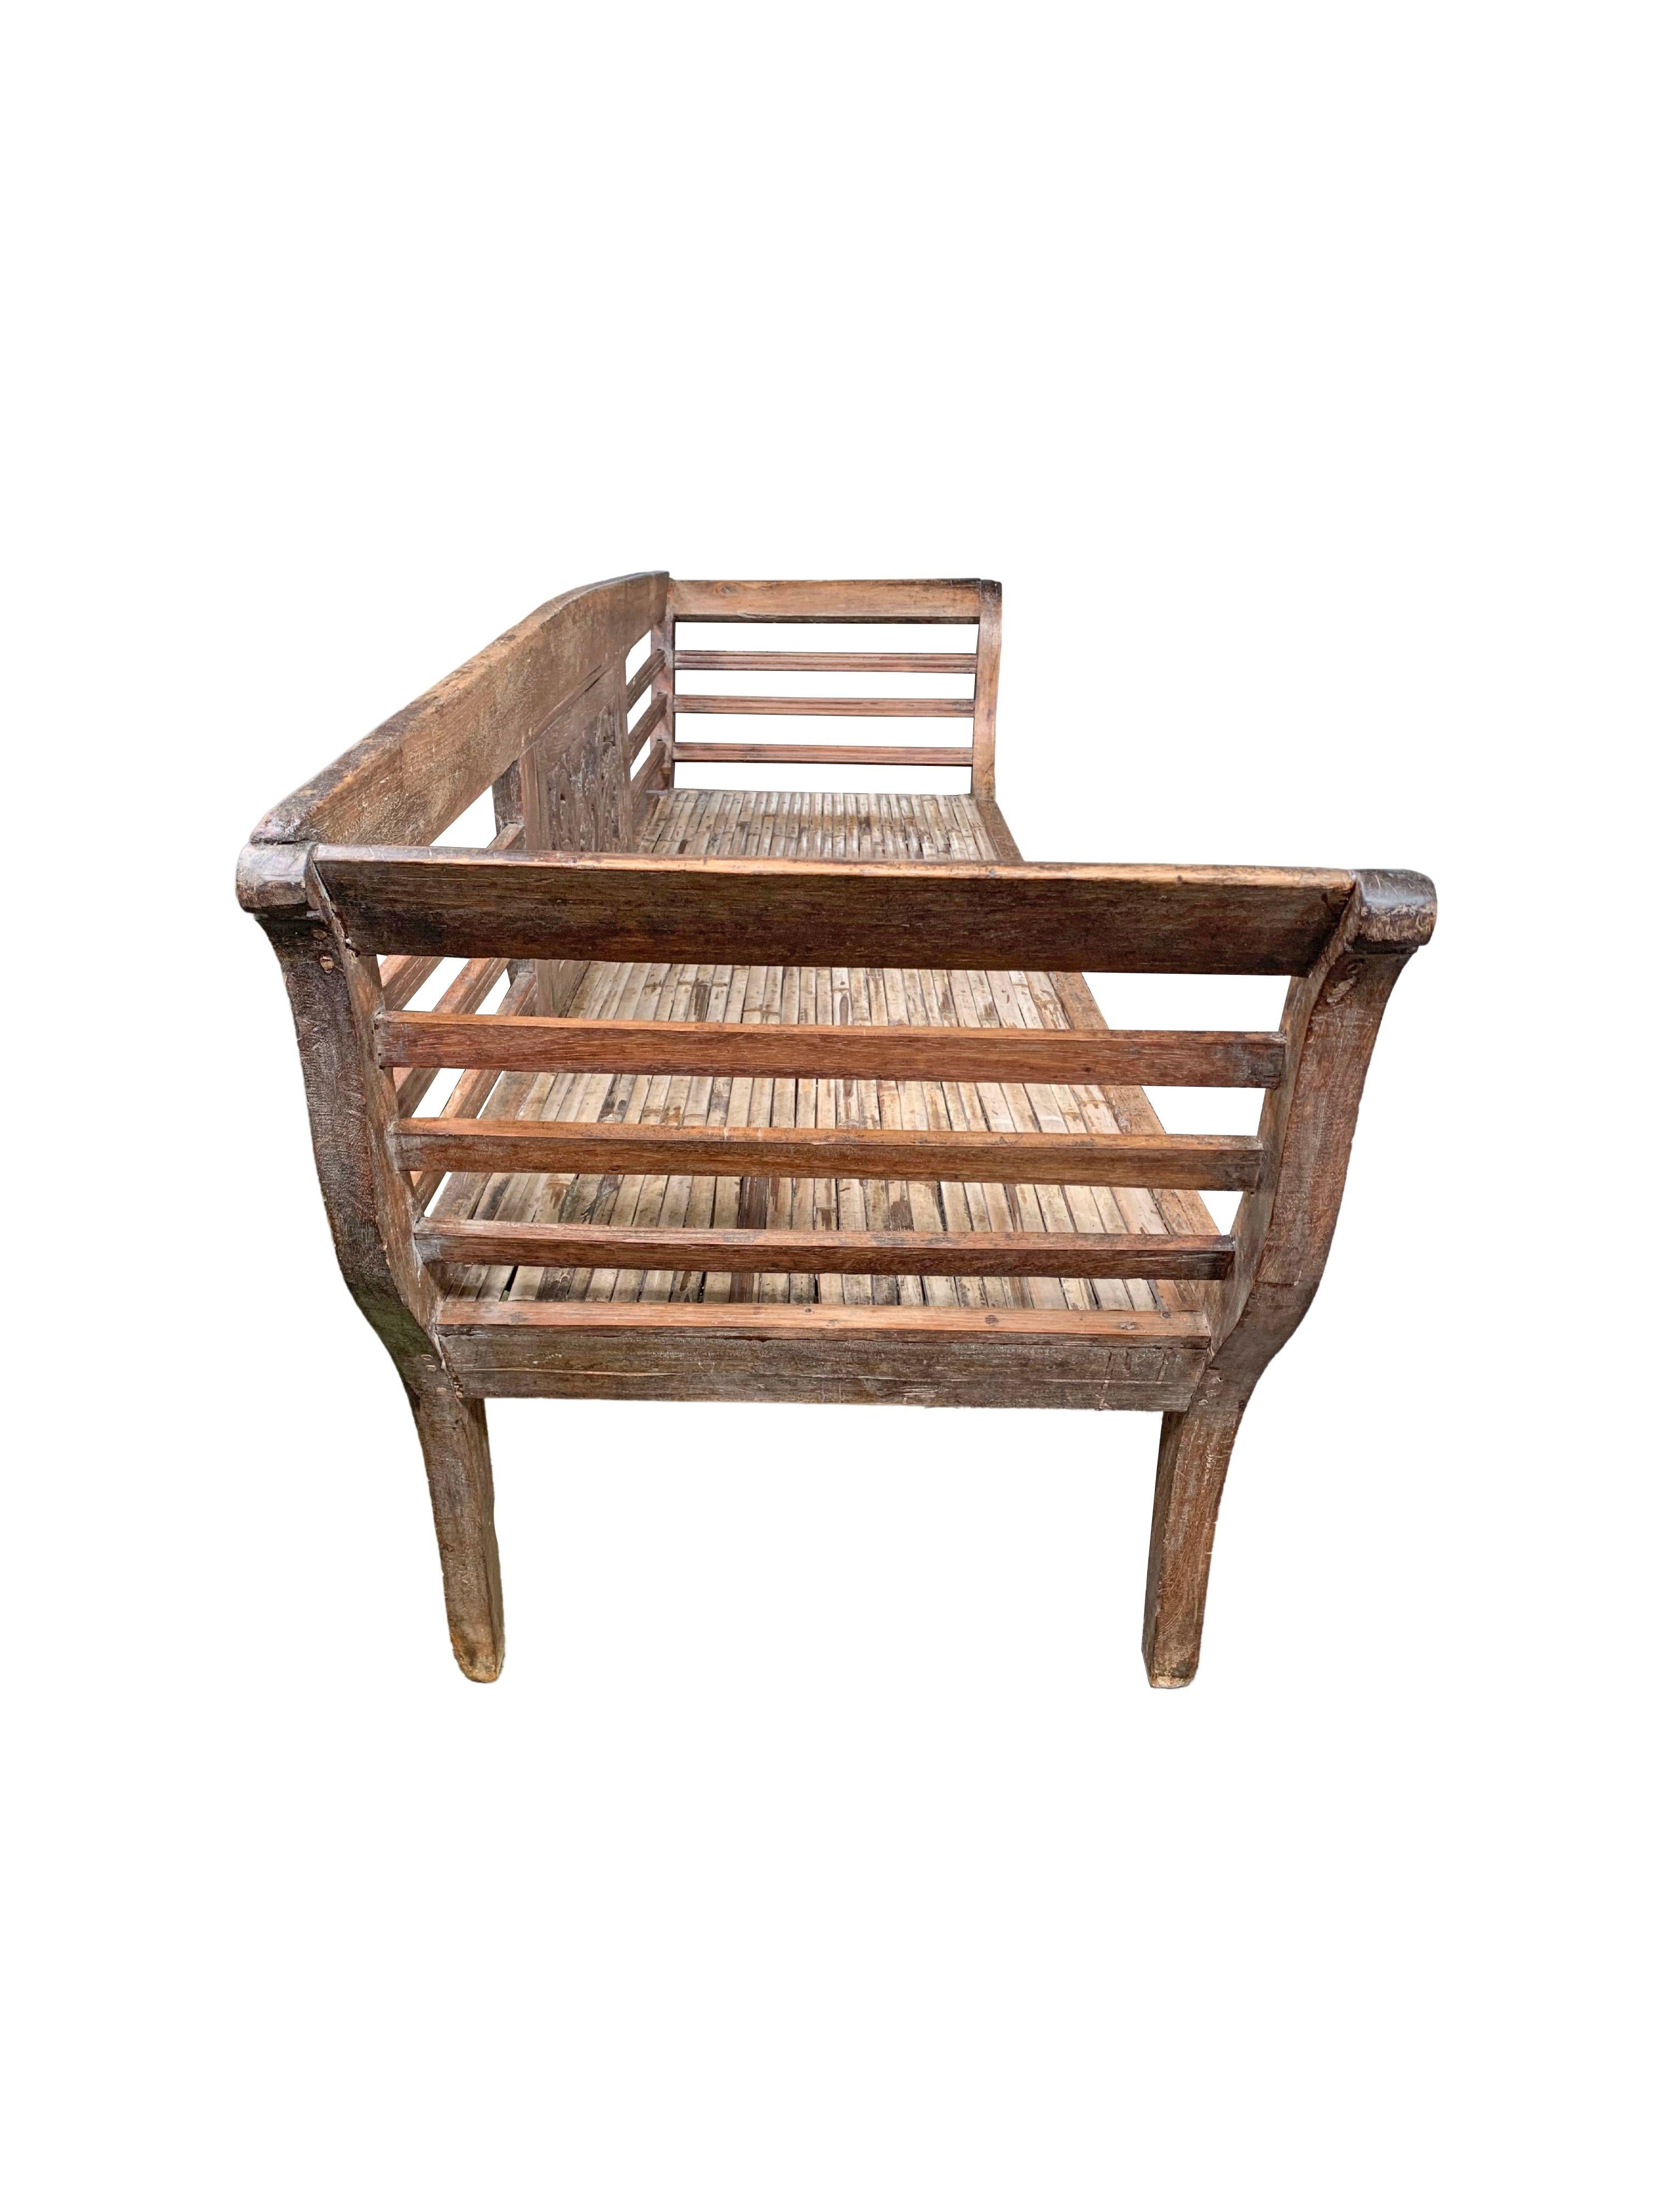 Teak & Bamboo Bench with Carved Detailing Madura Island, Java, Indonesia c. 1950 In Good Condition For Sale In Jimbaran, Bali